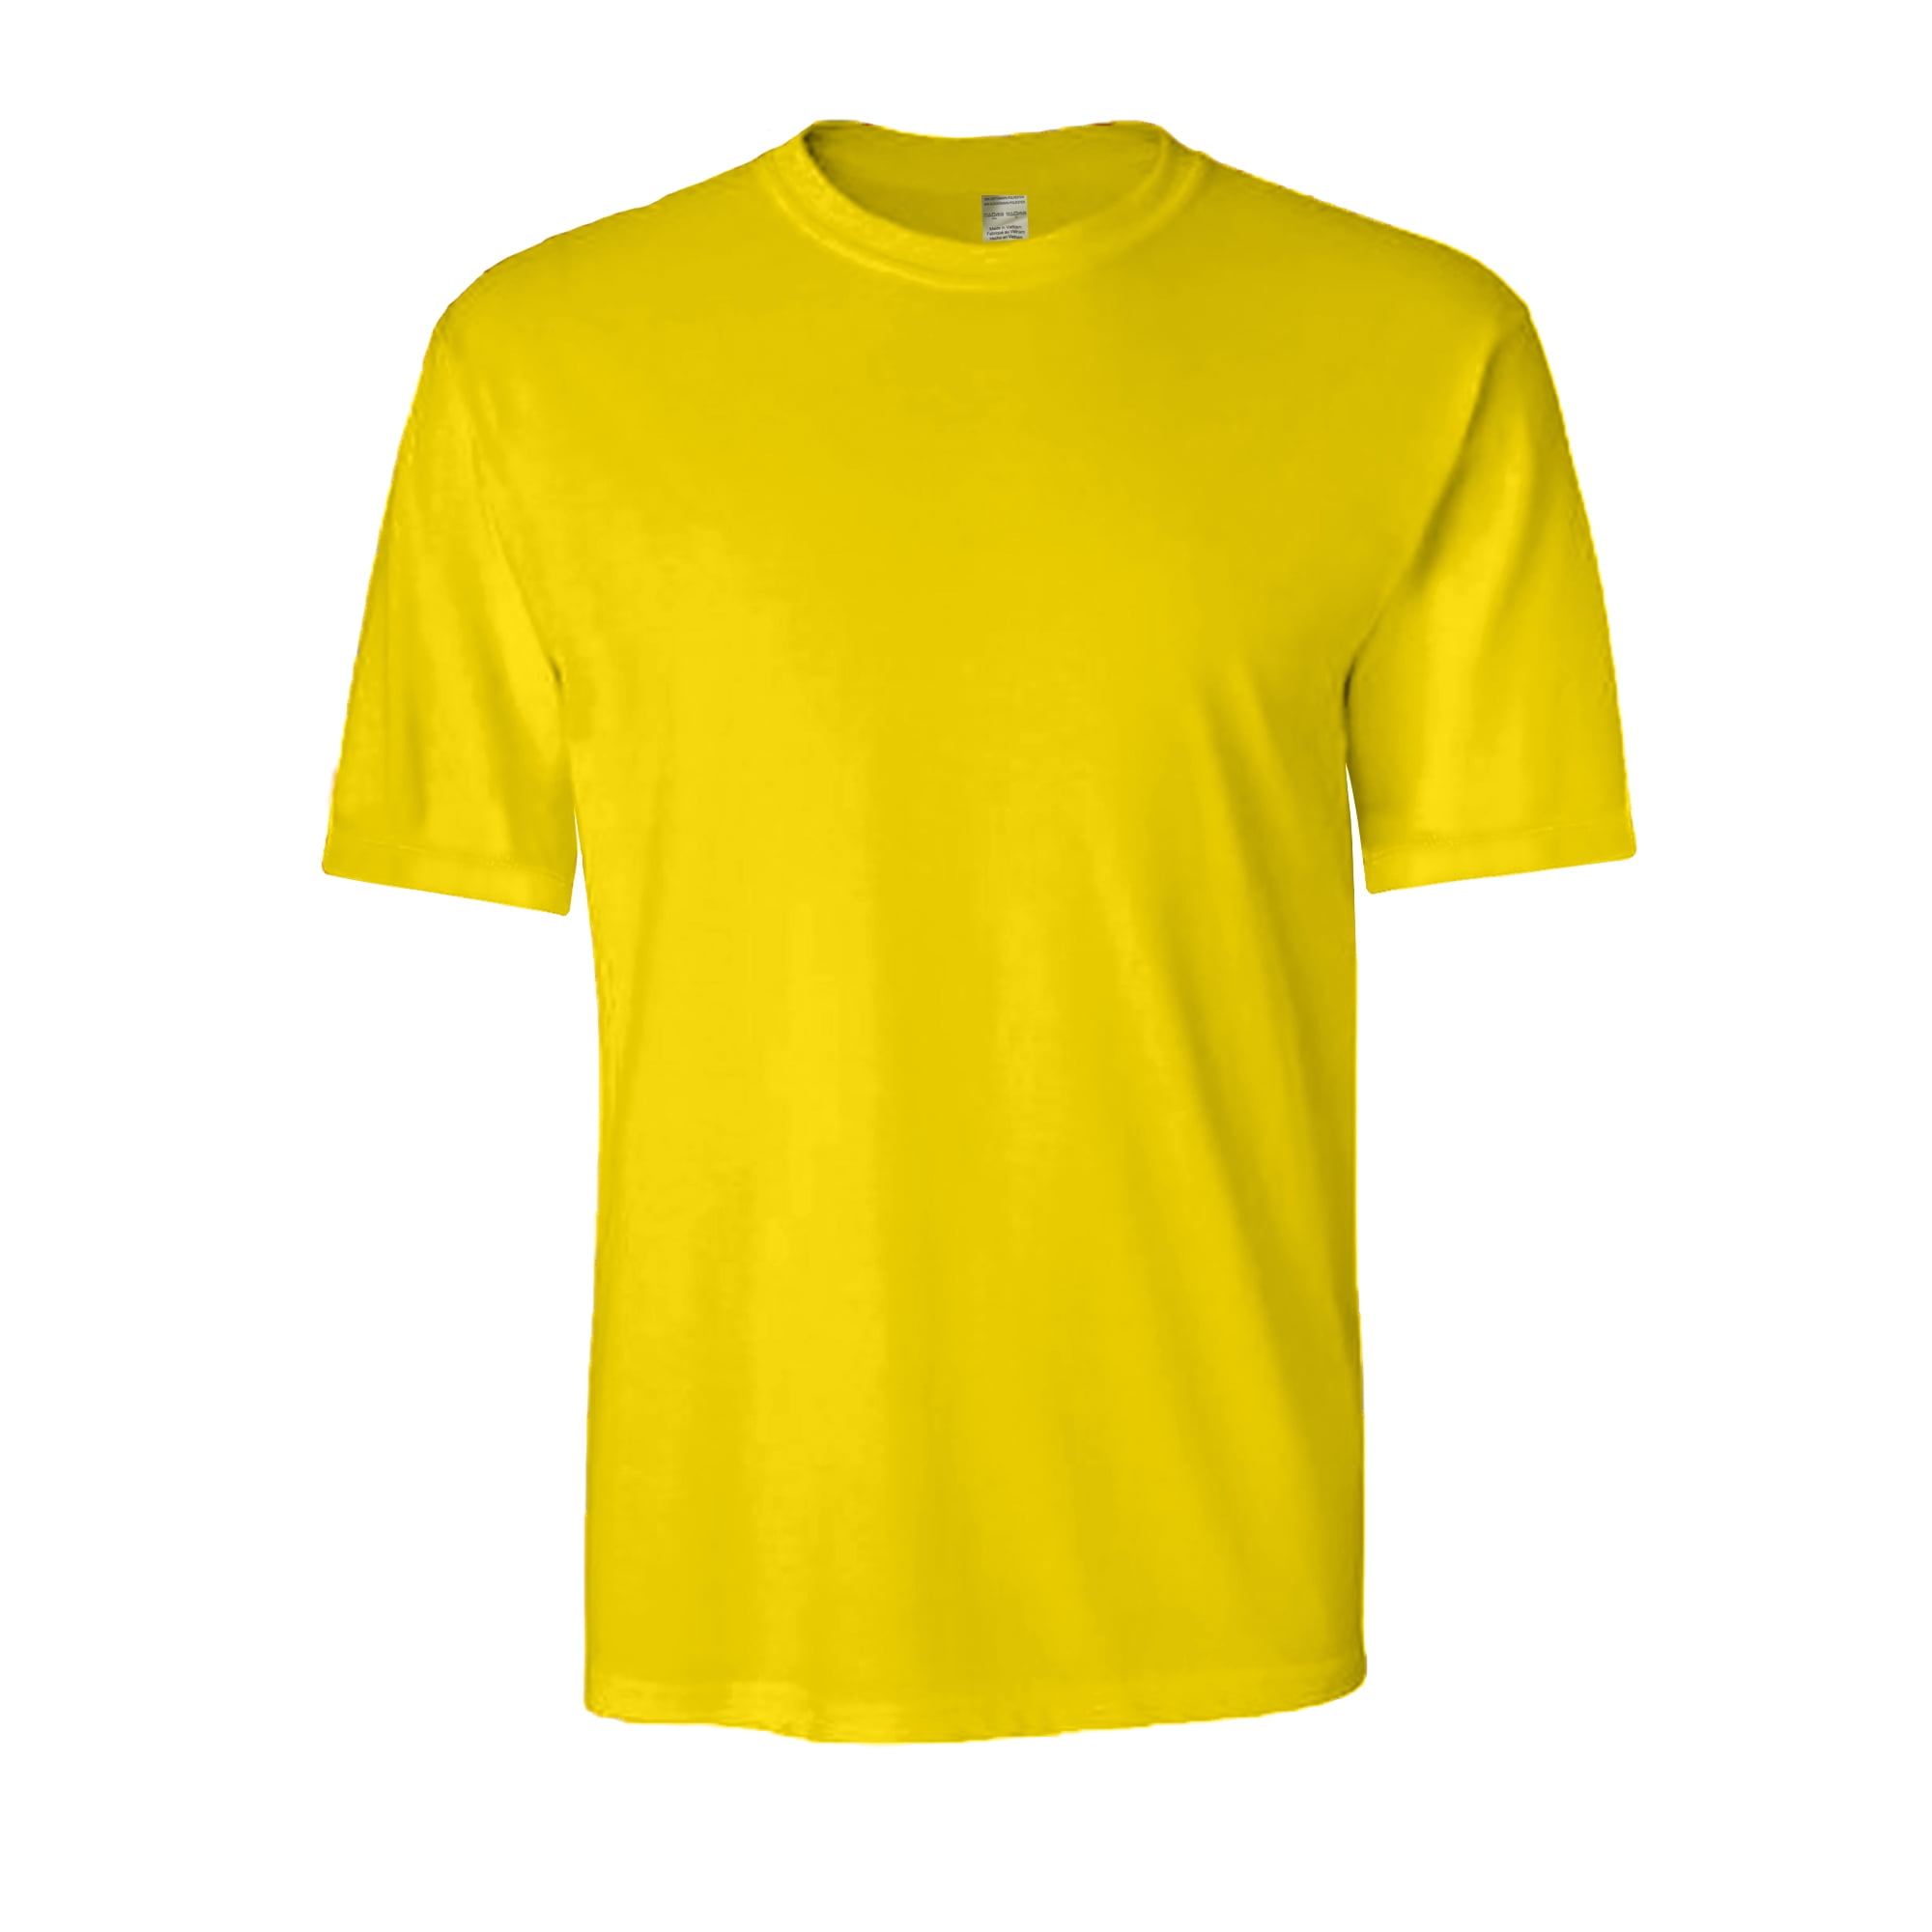 Radyan 50/50 Safety T Shirts for Men, Sublimation Tees